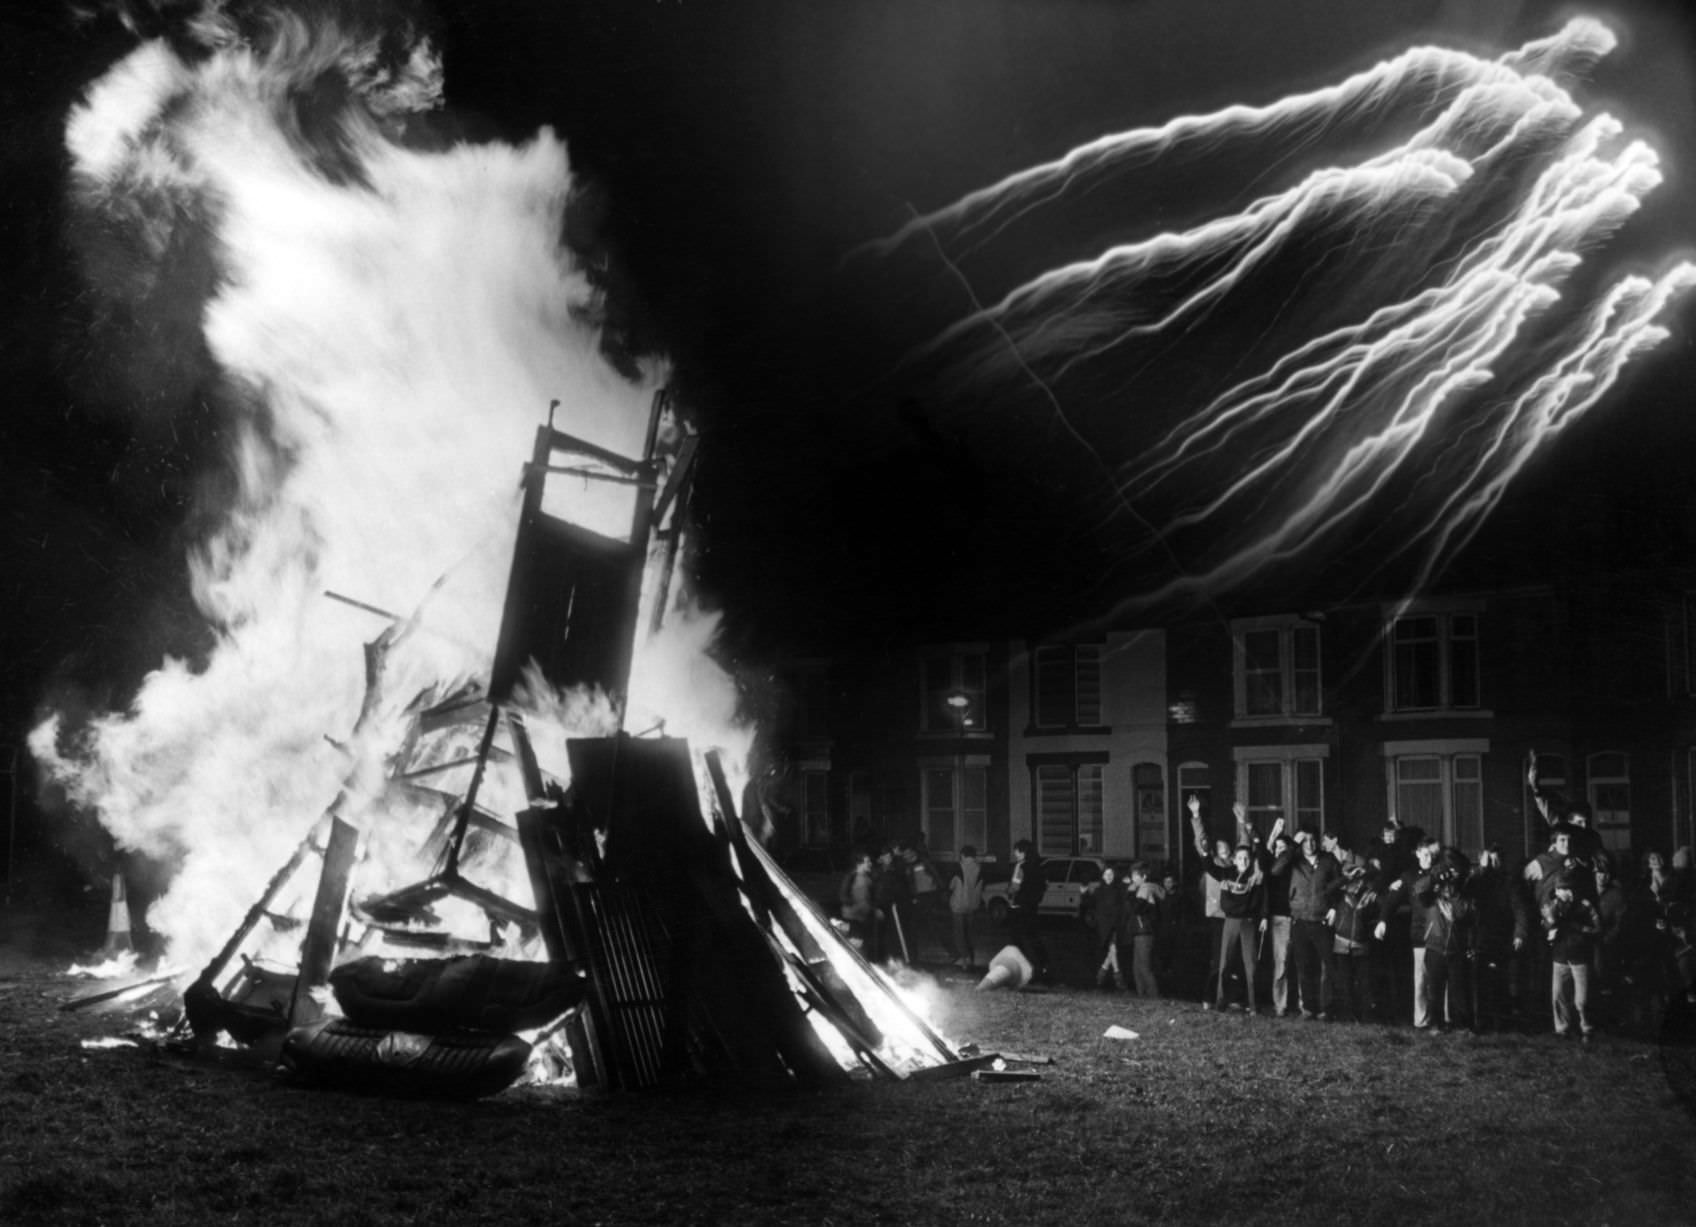 Youngsters enjoying Guy Fawkes Night, Hornby Boulevard, Bootle, Sefton in Merseyside, 5th November 1985